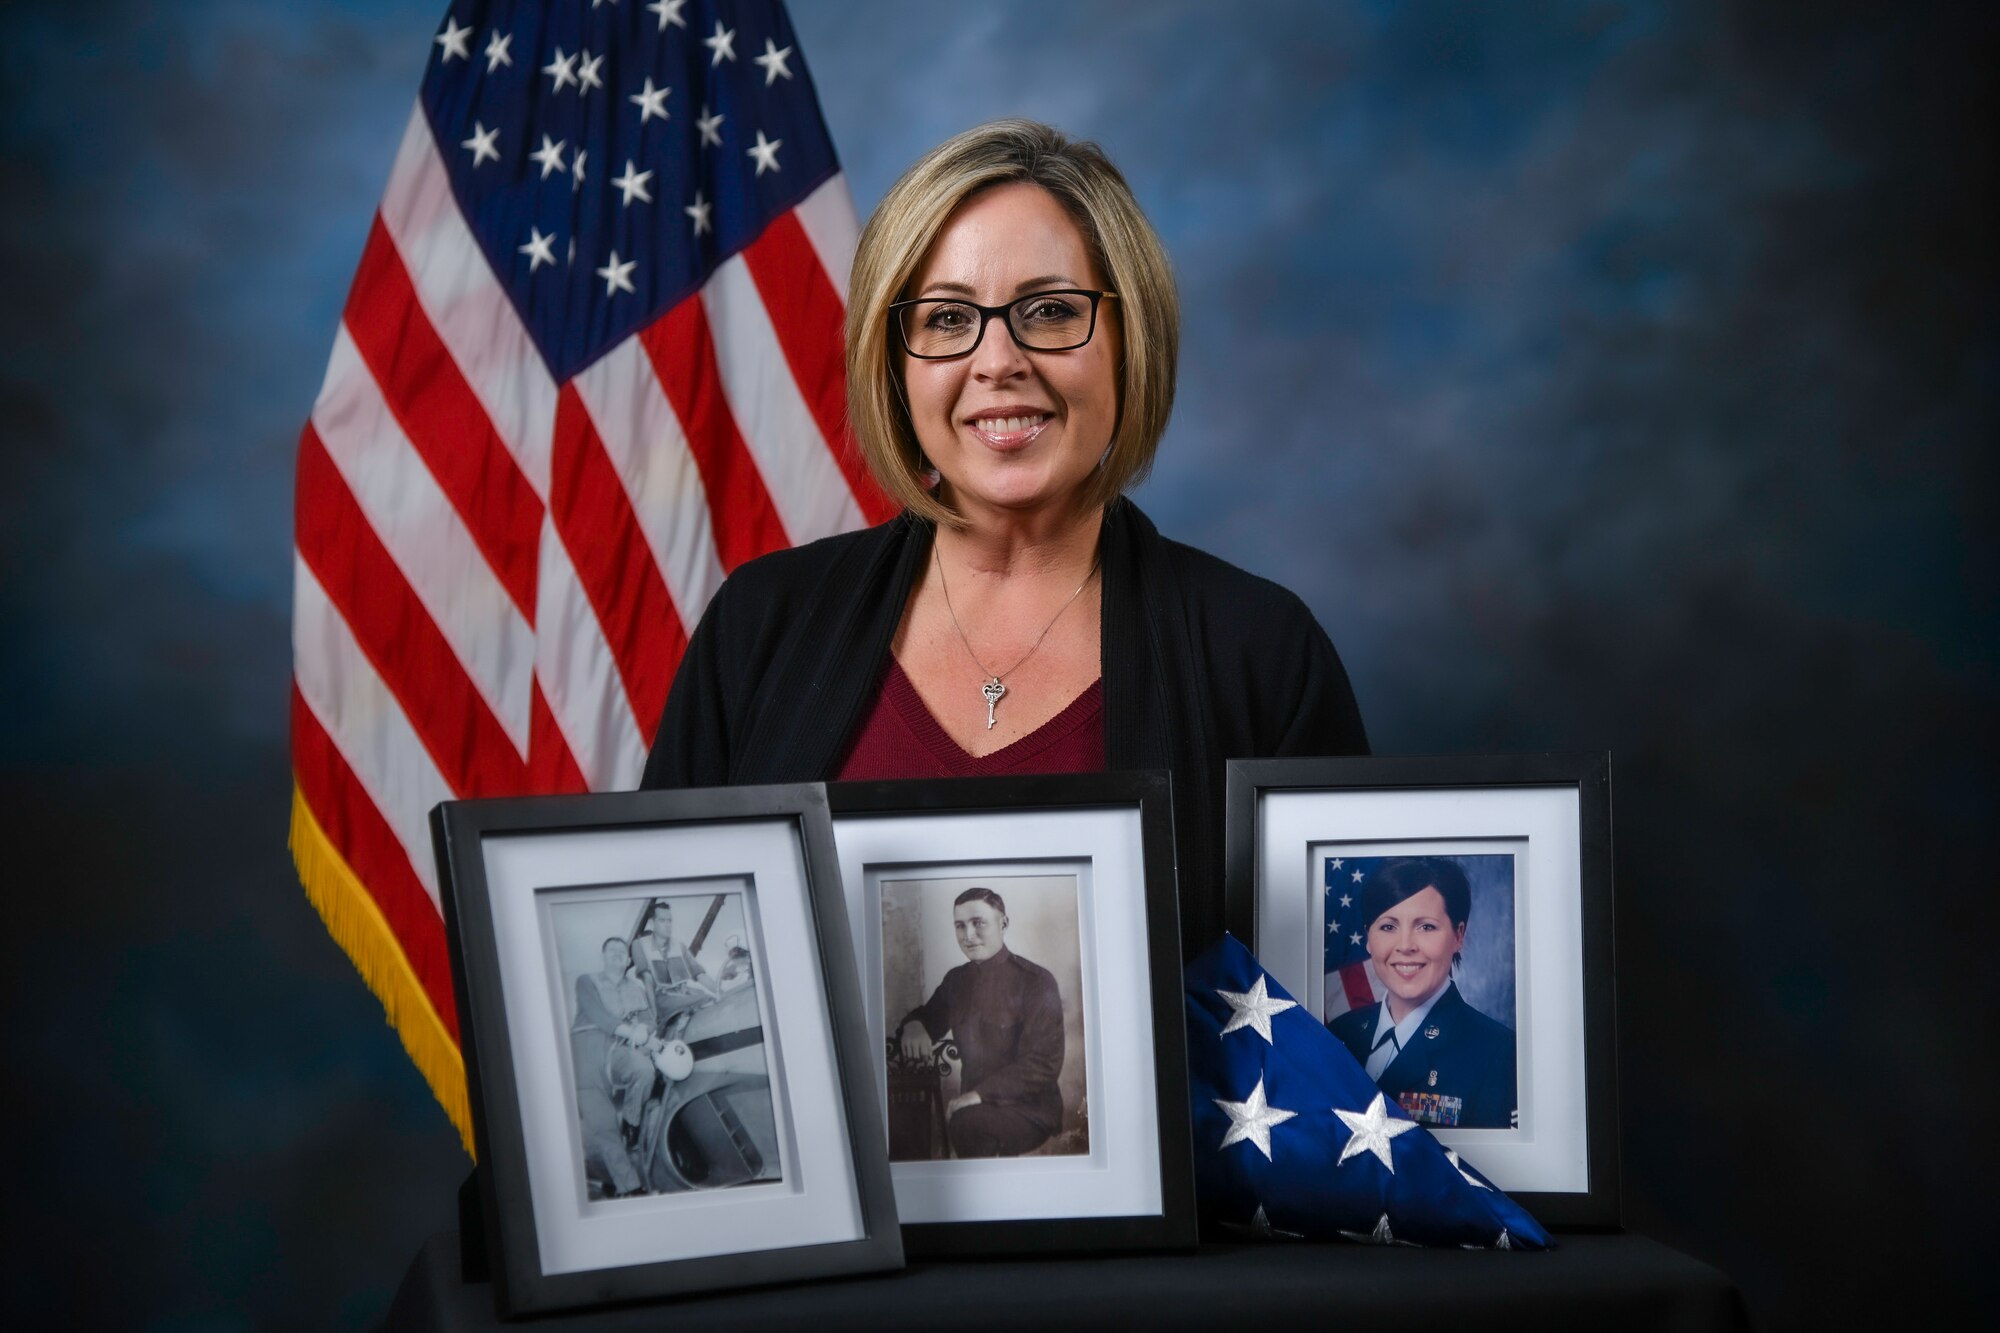 Woman poses for photo with portrait pictures and flag.